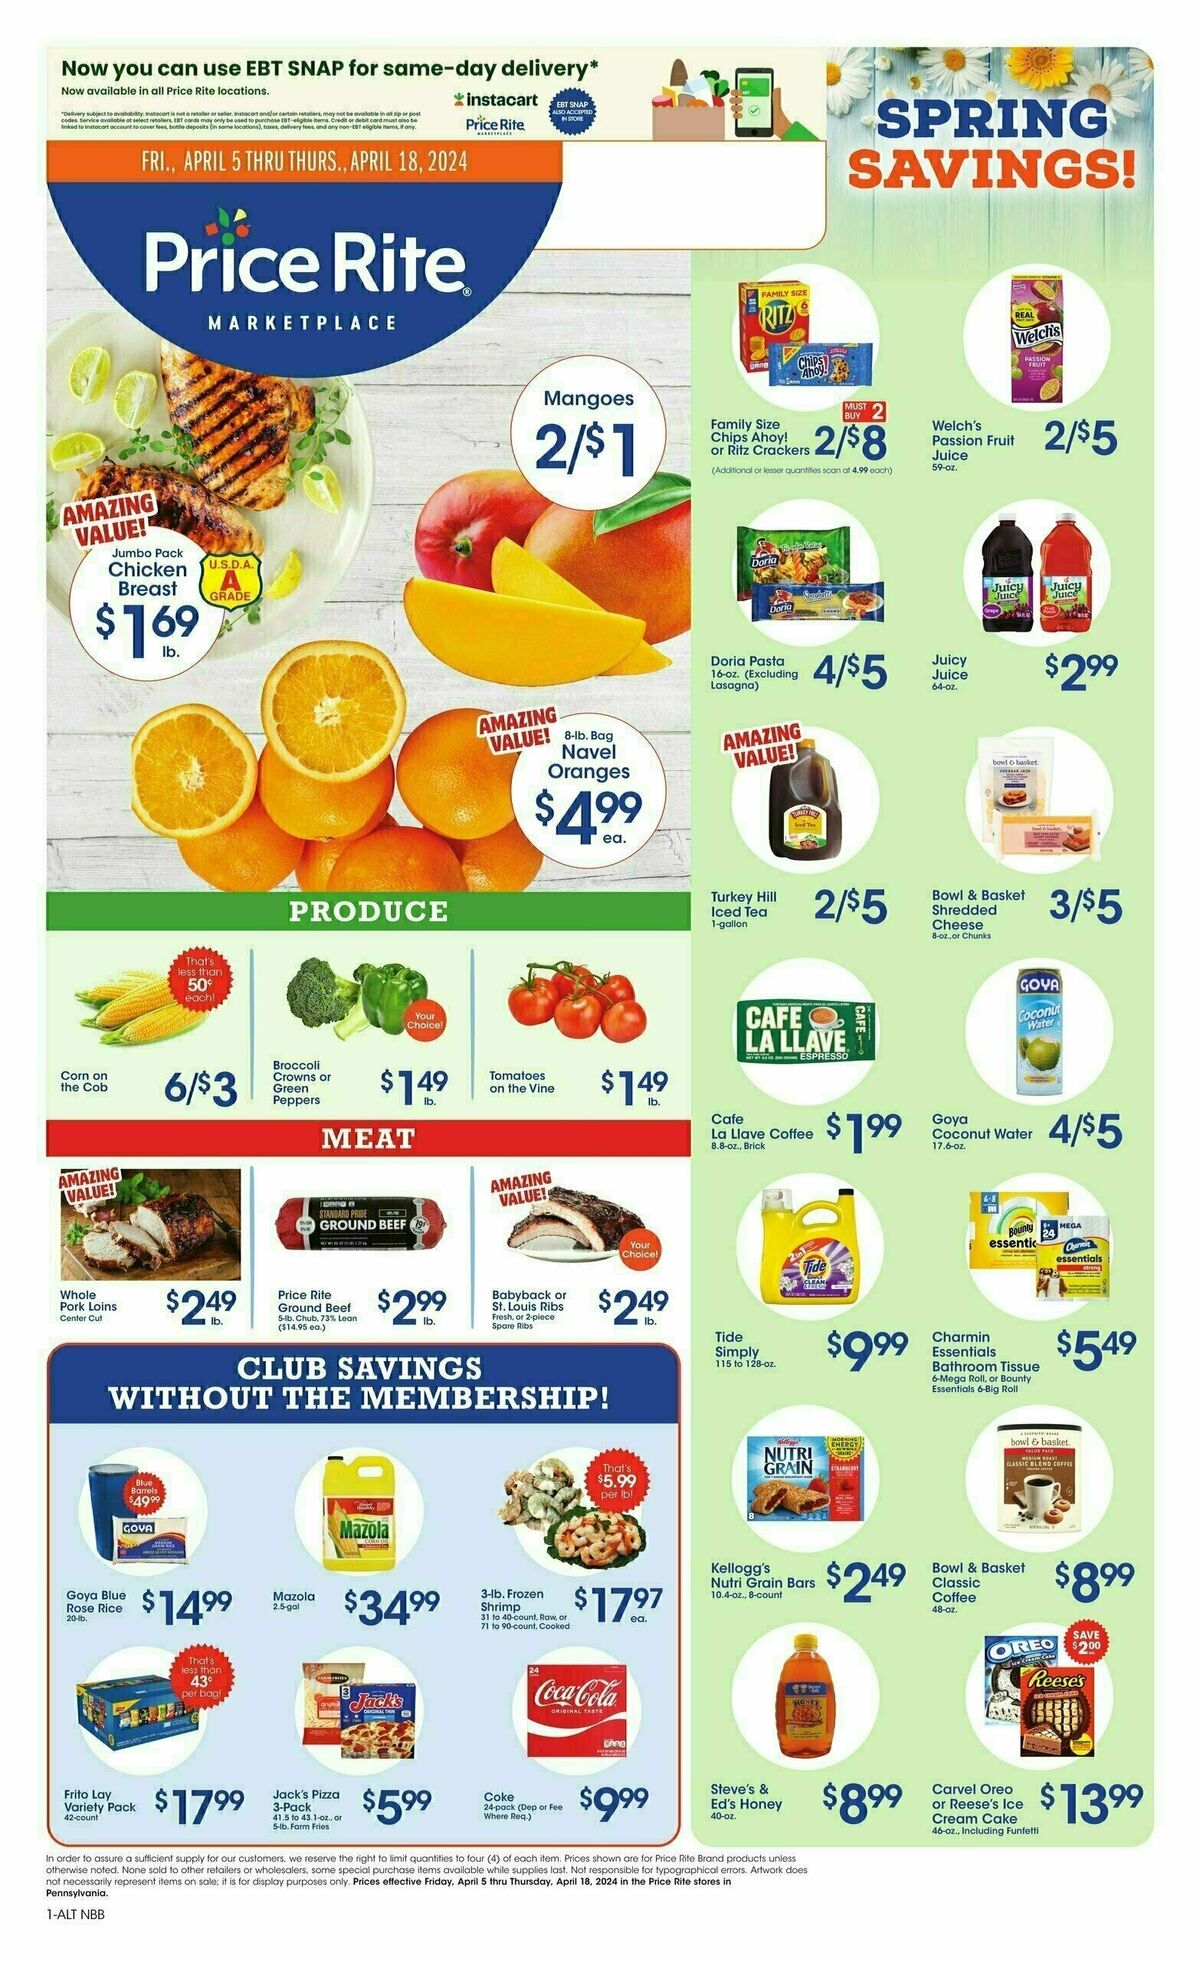 Price Rite Weekly Ad from April 5